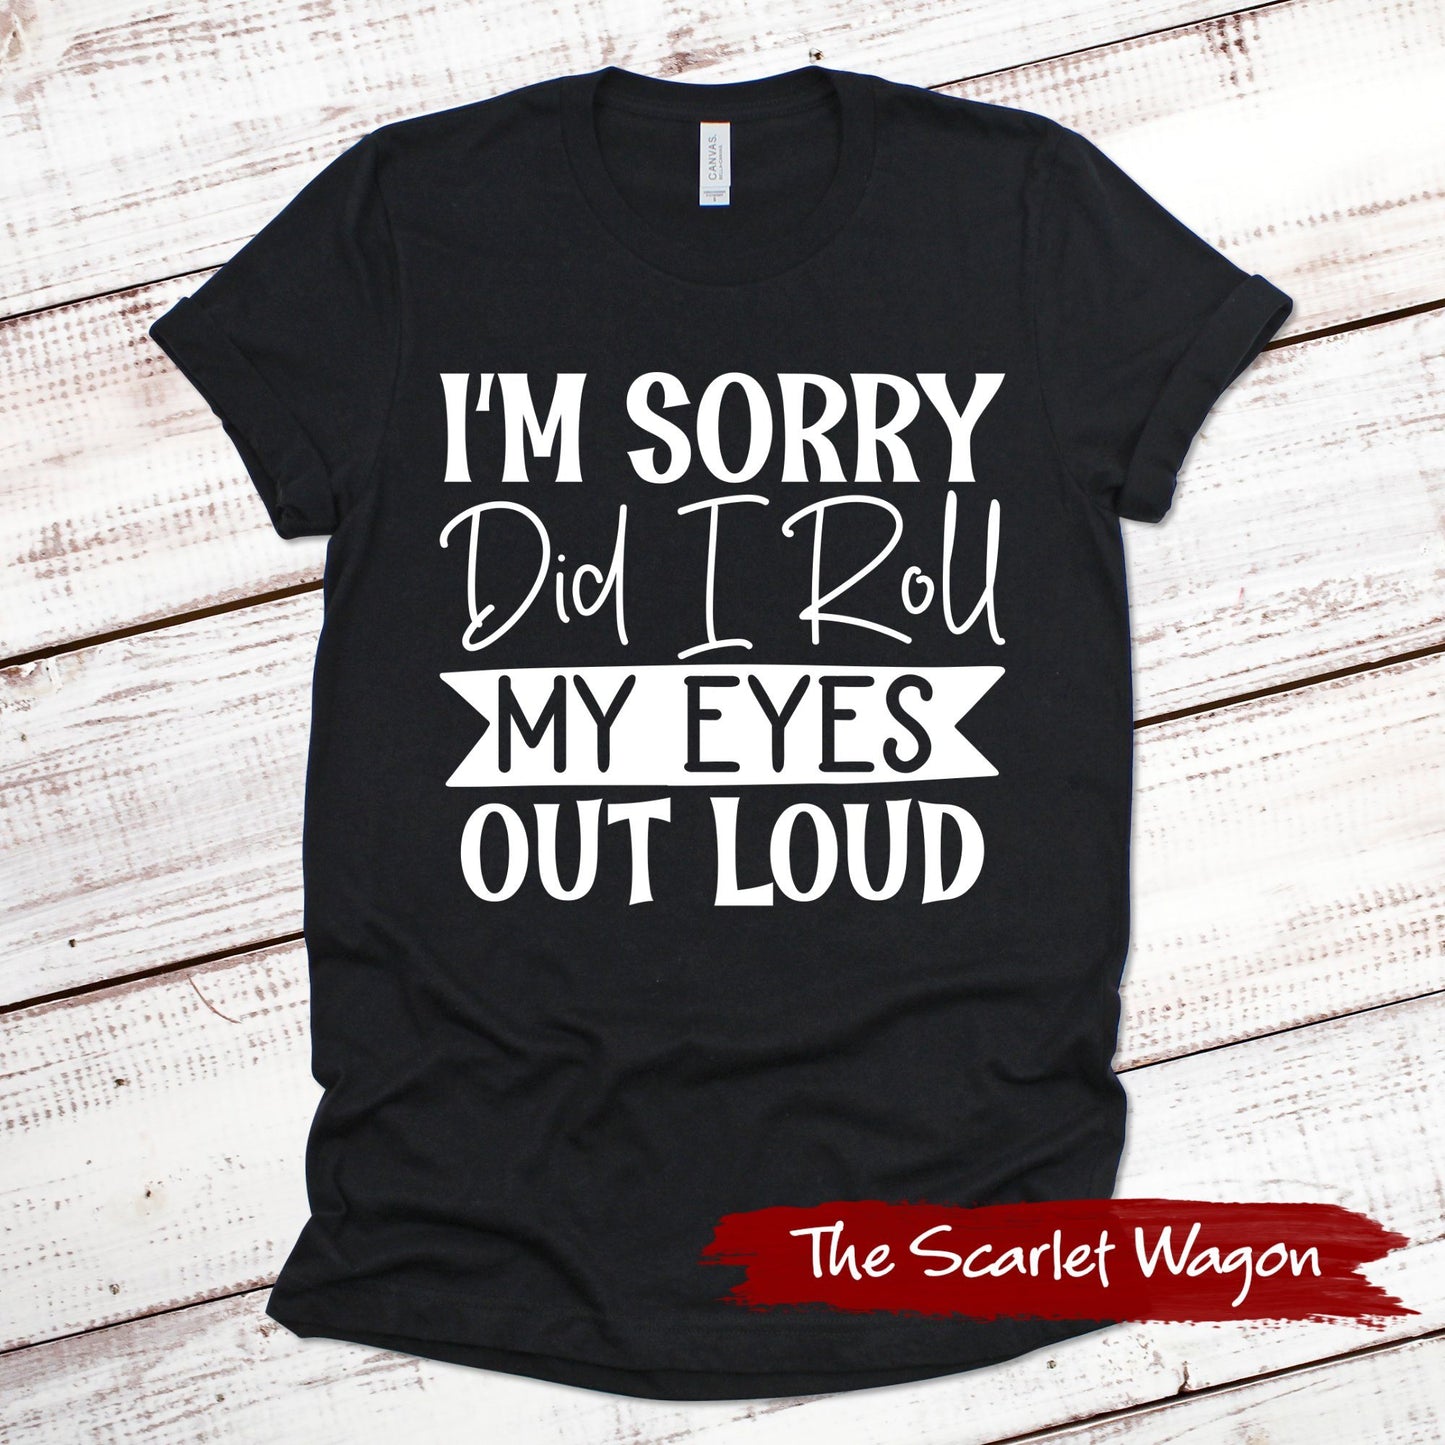 I'm Sorry Did I Roll My Eyes Out Loud Funny Shirt Scarlet Wagon Black XS 